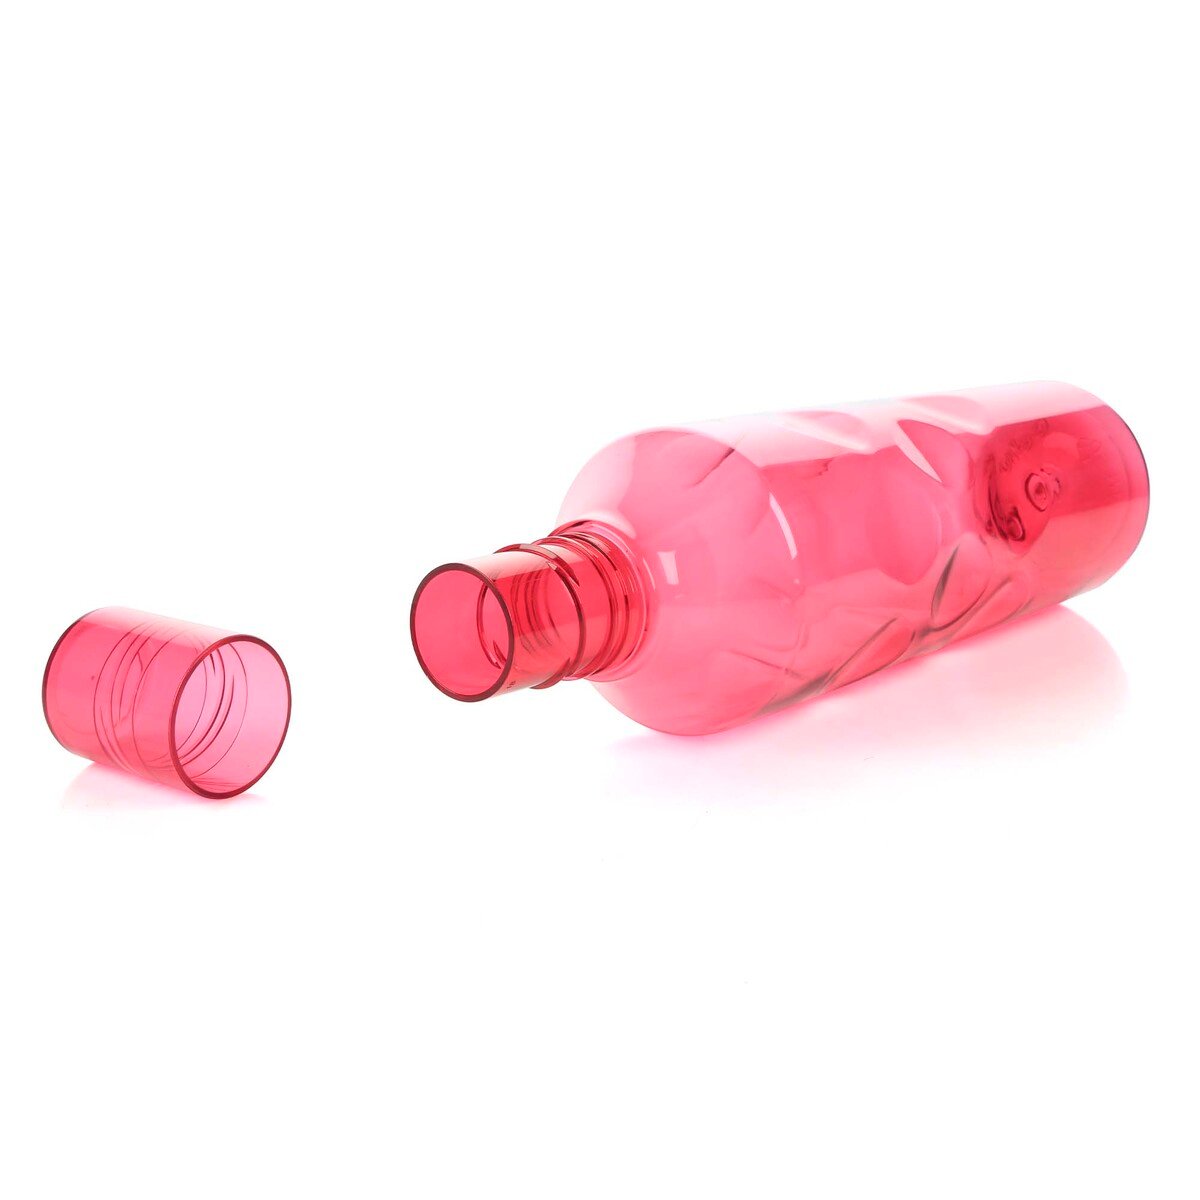 Cello Mozzy Plastic Water Bottle, 1 L, Pink, Mozzy1000